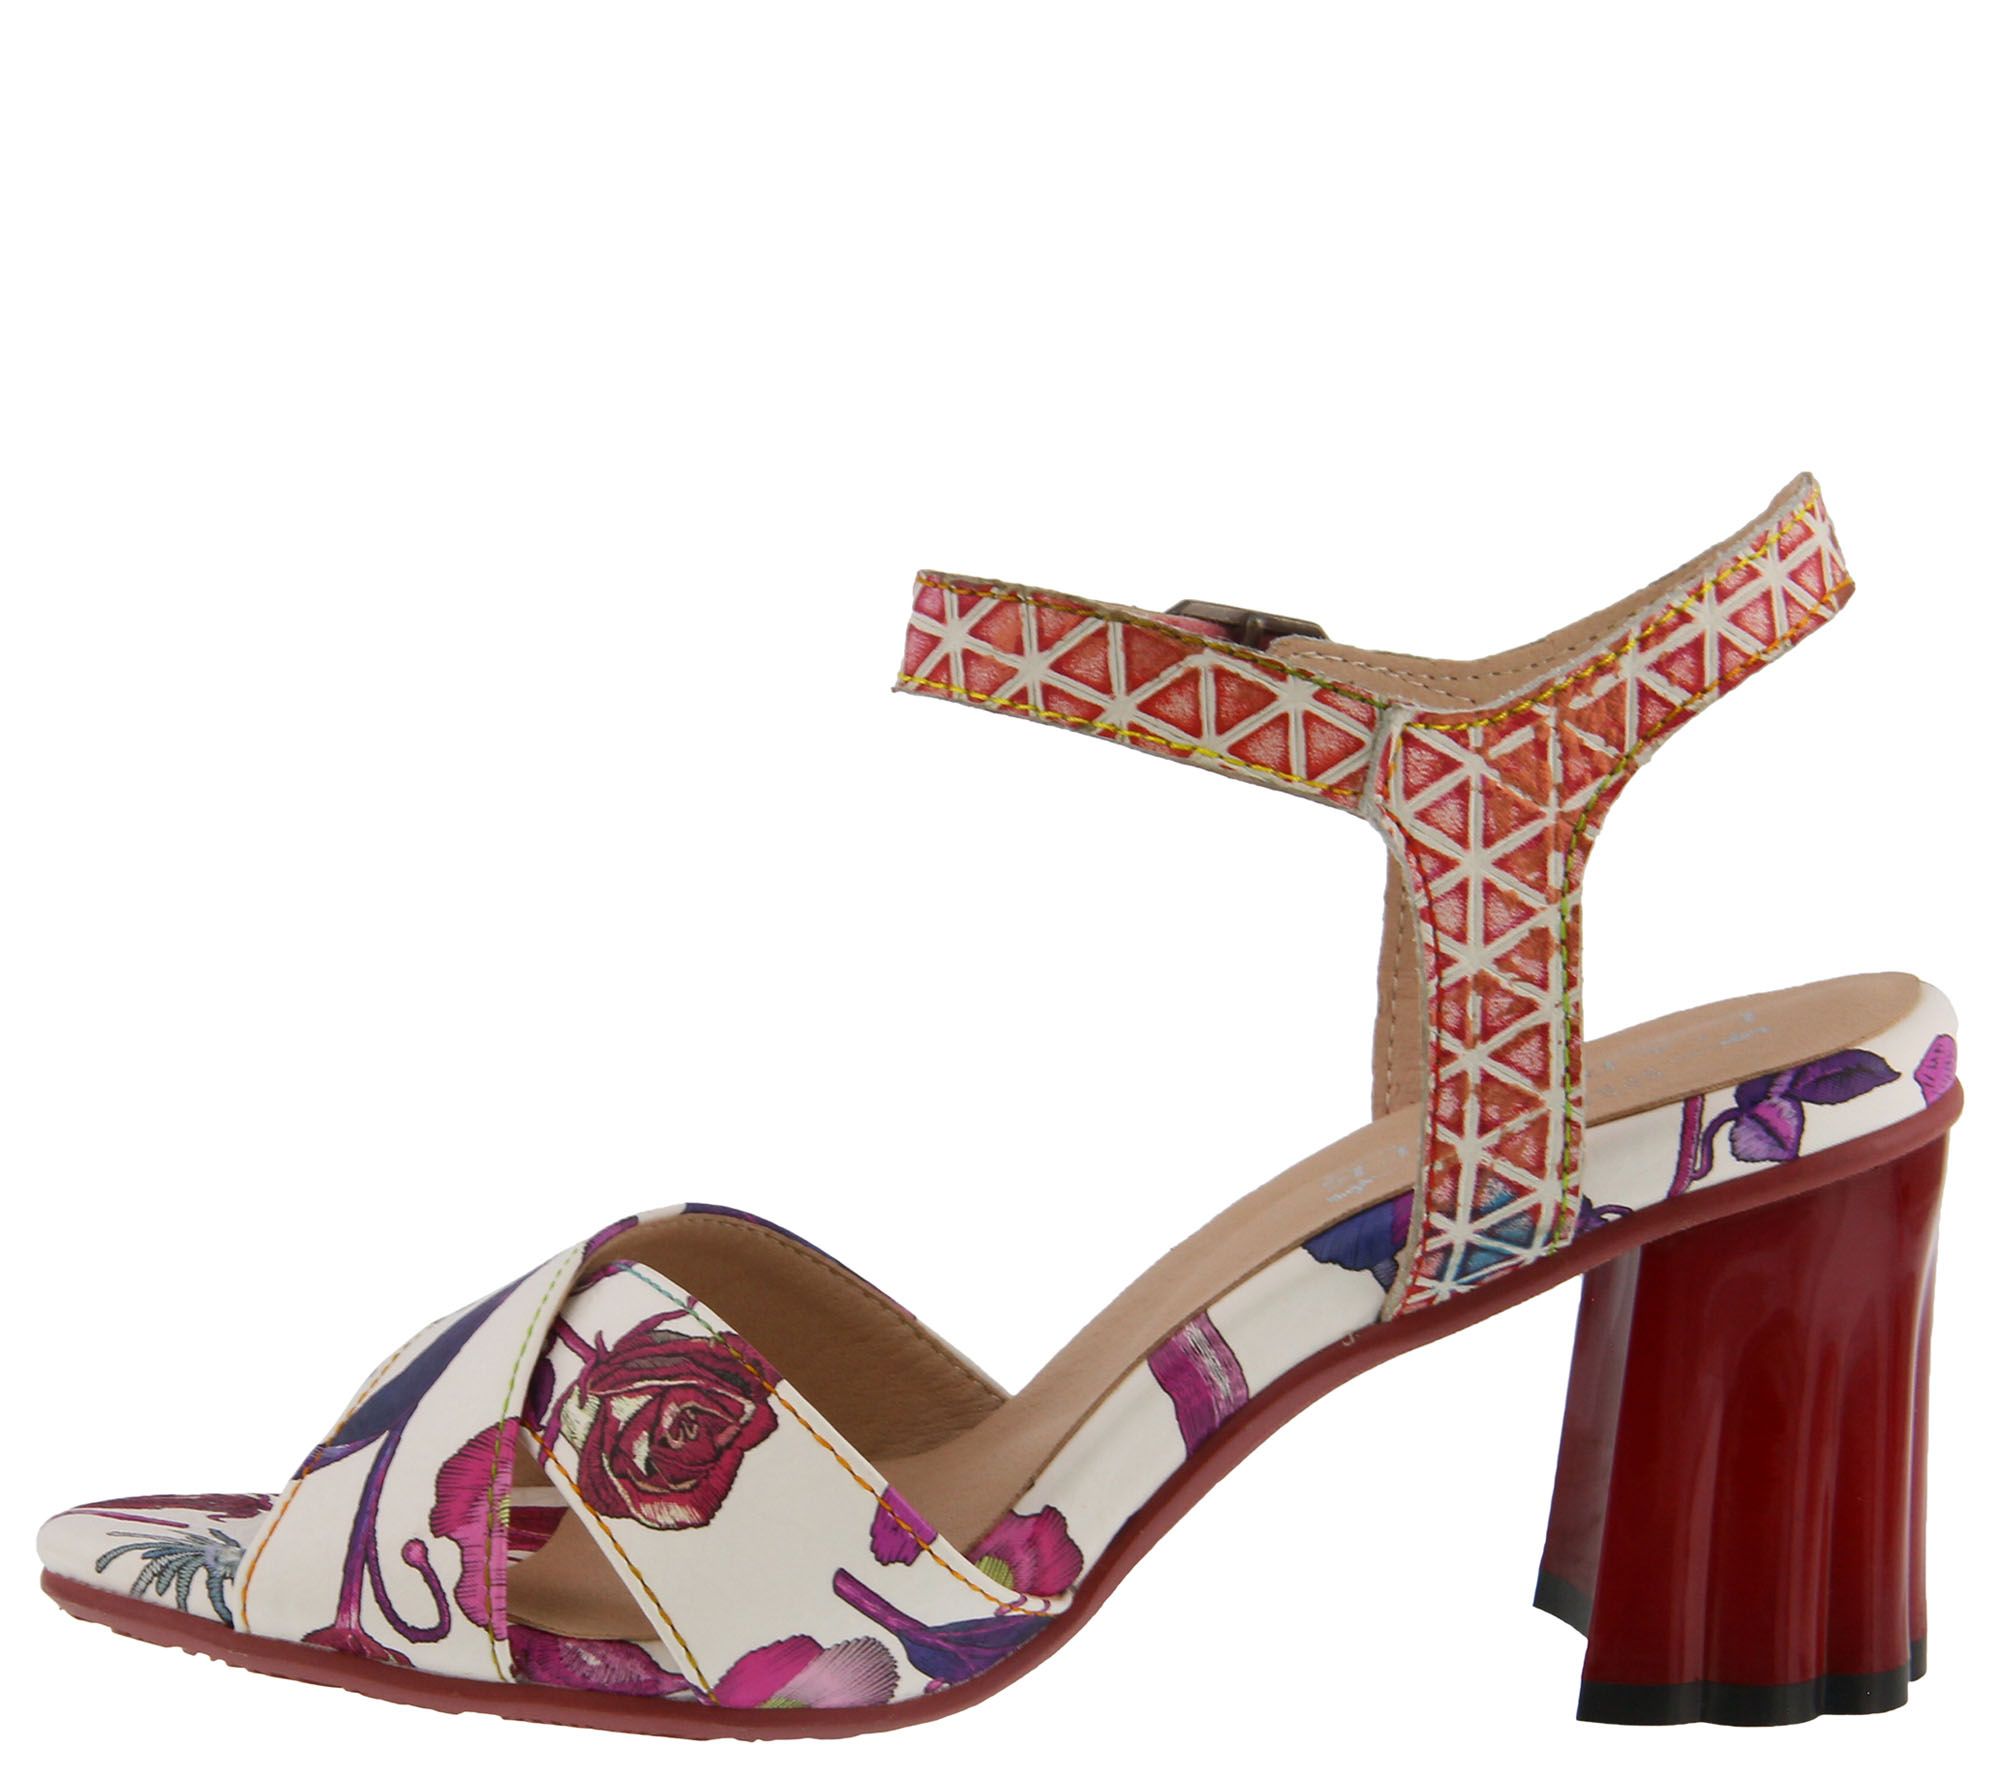 L'Artiste by Spring Step Ankle Strap Sandals -Galexia - QVC.com